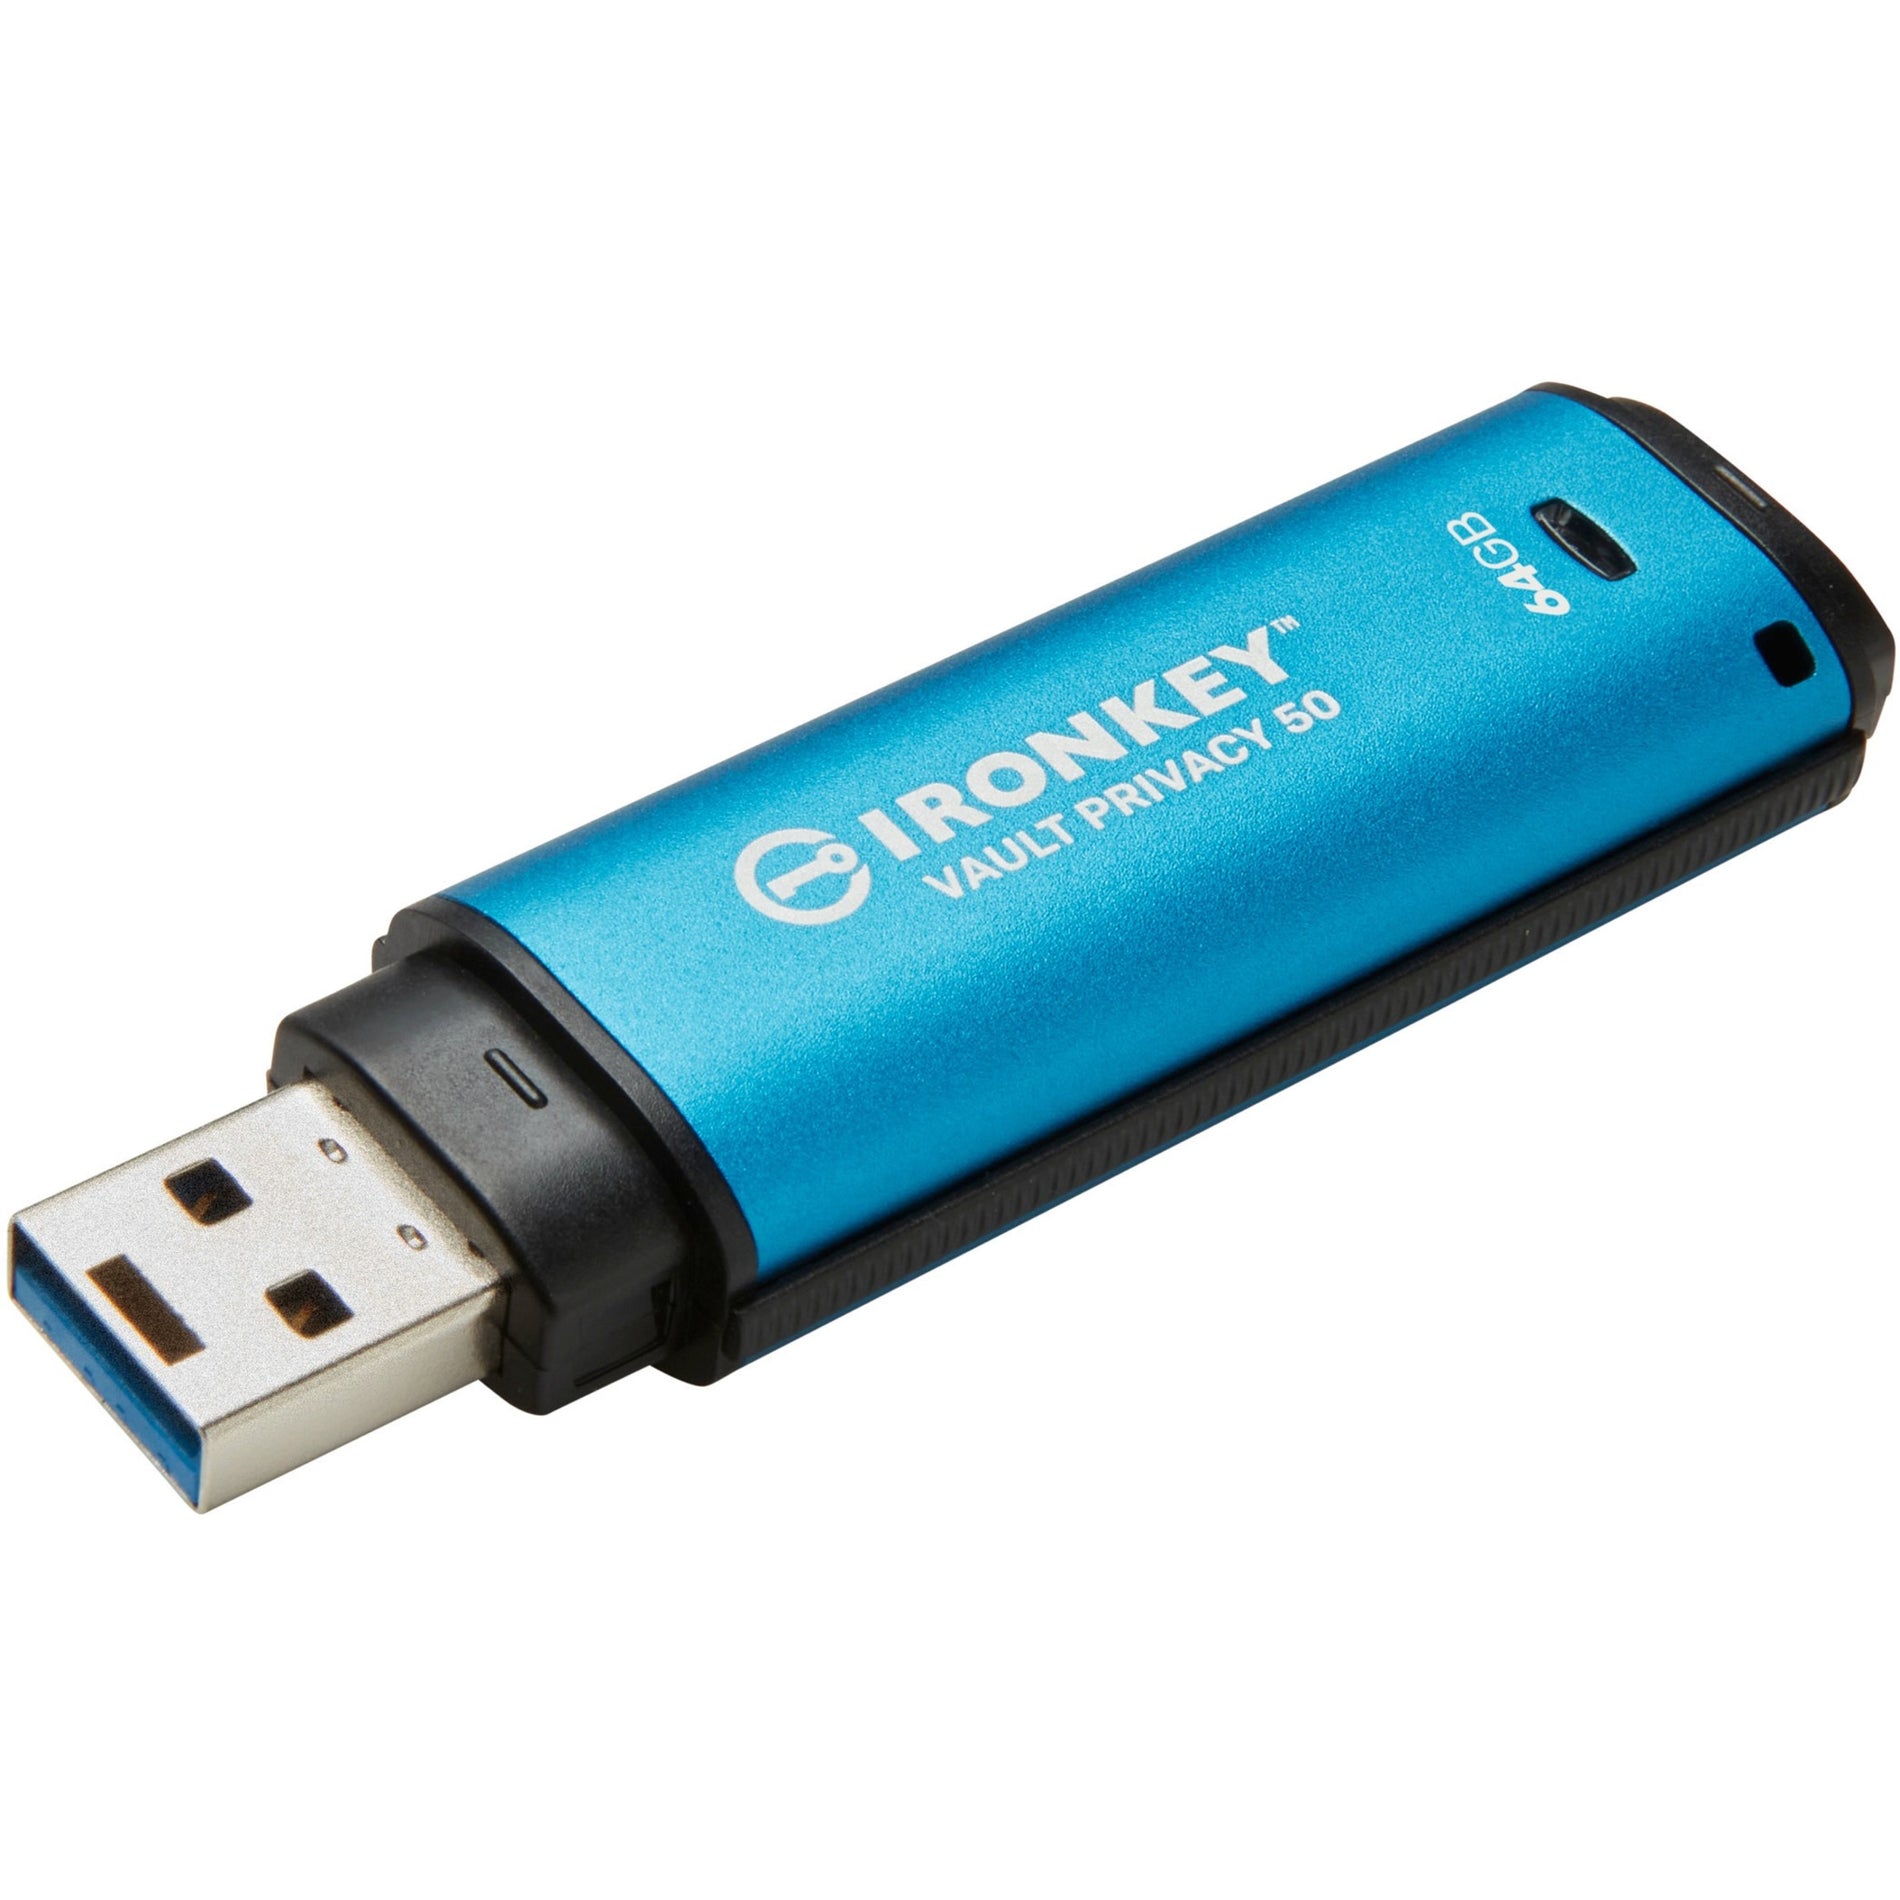 IronKey IKVP50/64GB Vault Privacy 50 Series 64GB USB 3.2 (Gen 1) Type A Flash Drive, Password Protected, 256-bit AES Encryption